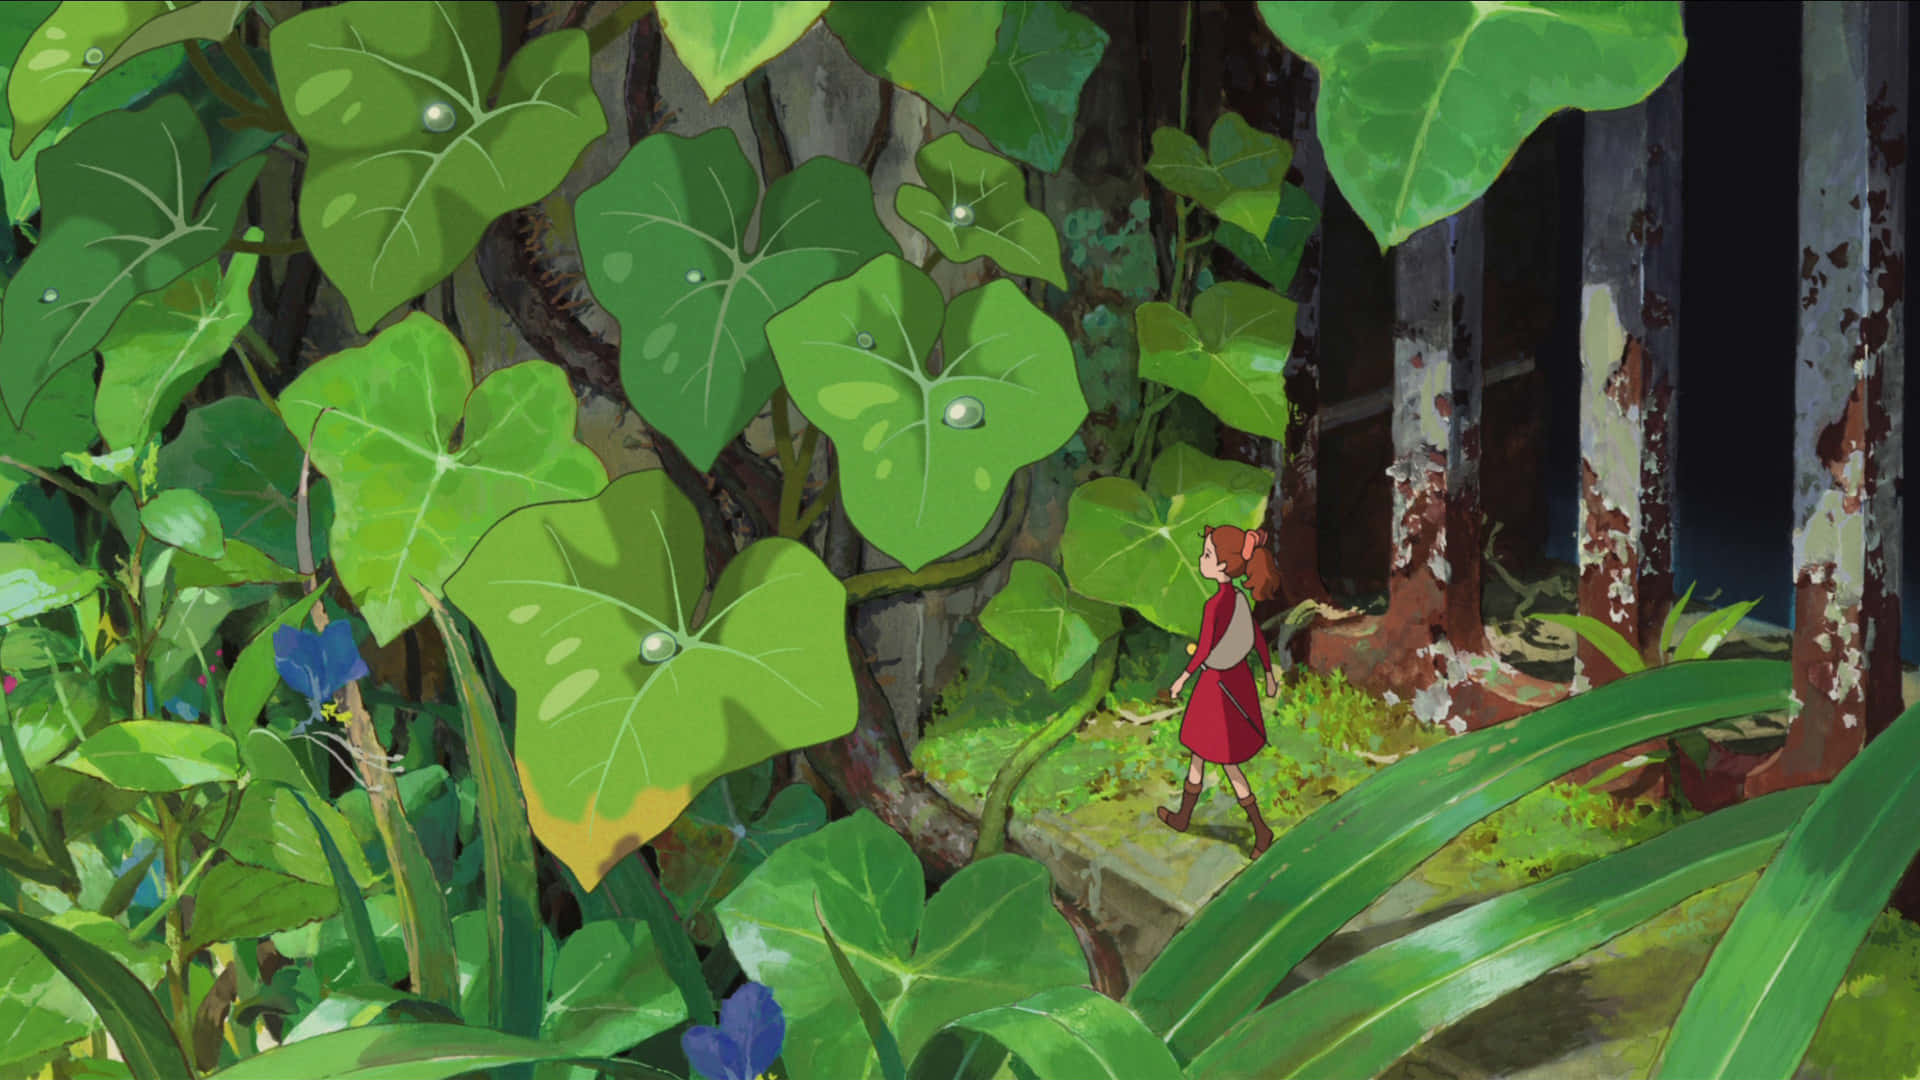 Arrietty and Shawn exploring the secret world together Wallpaper